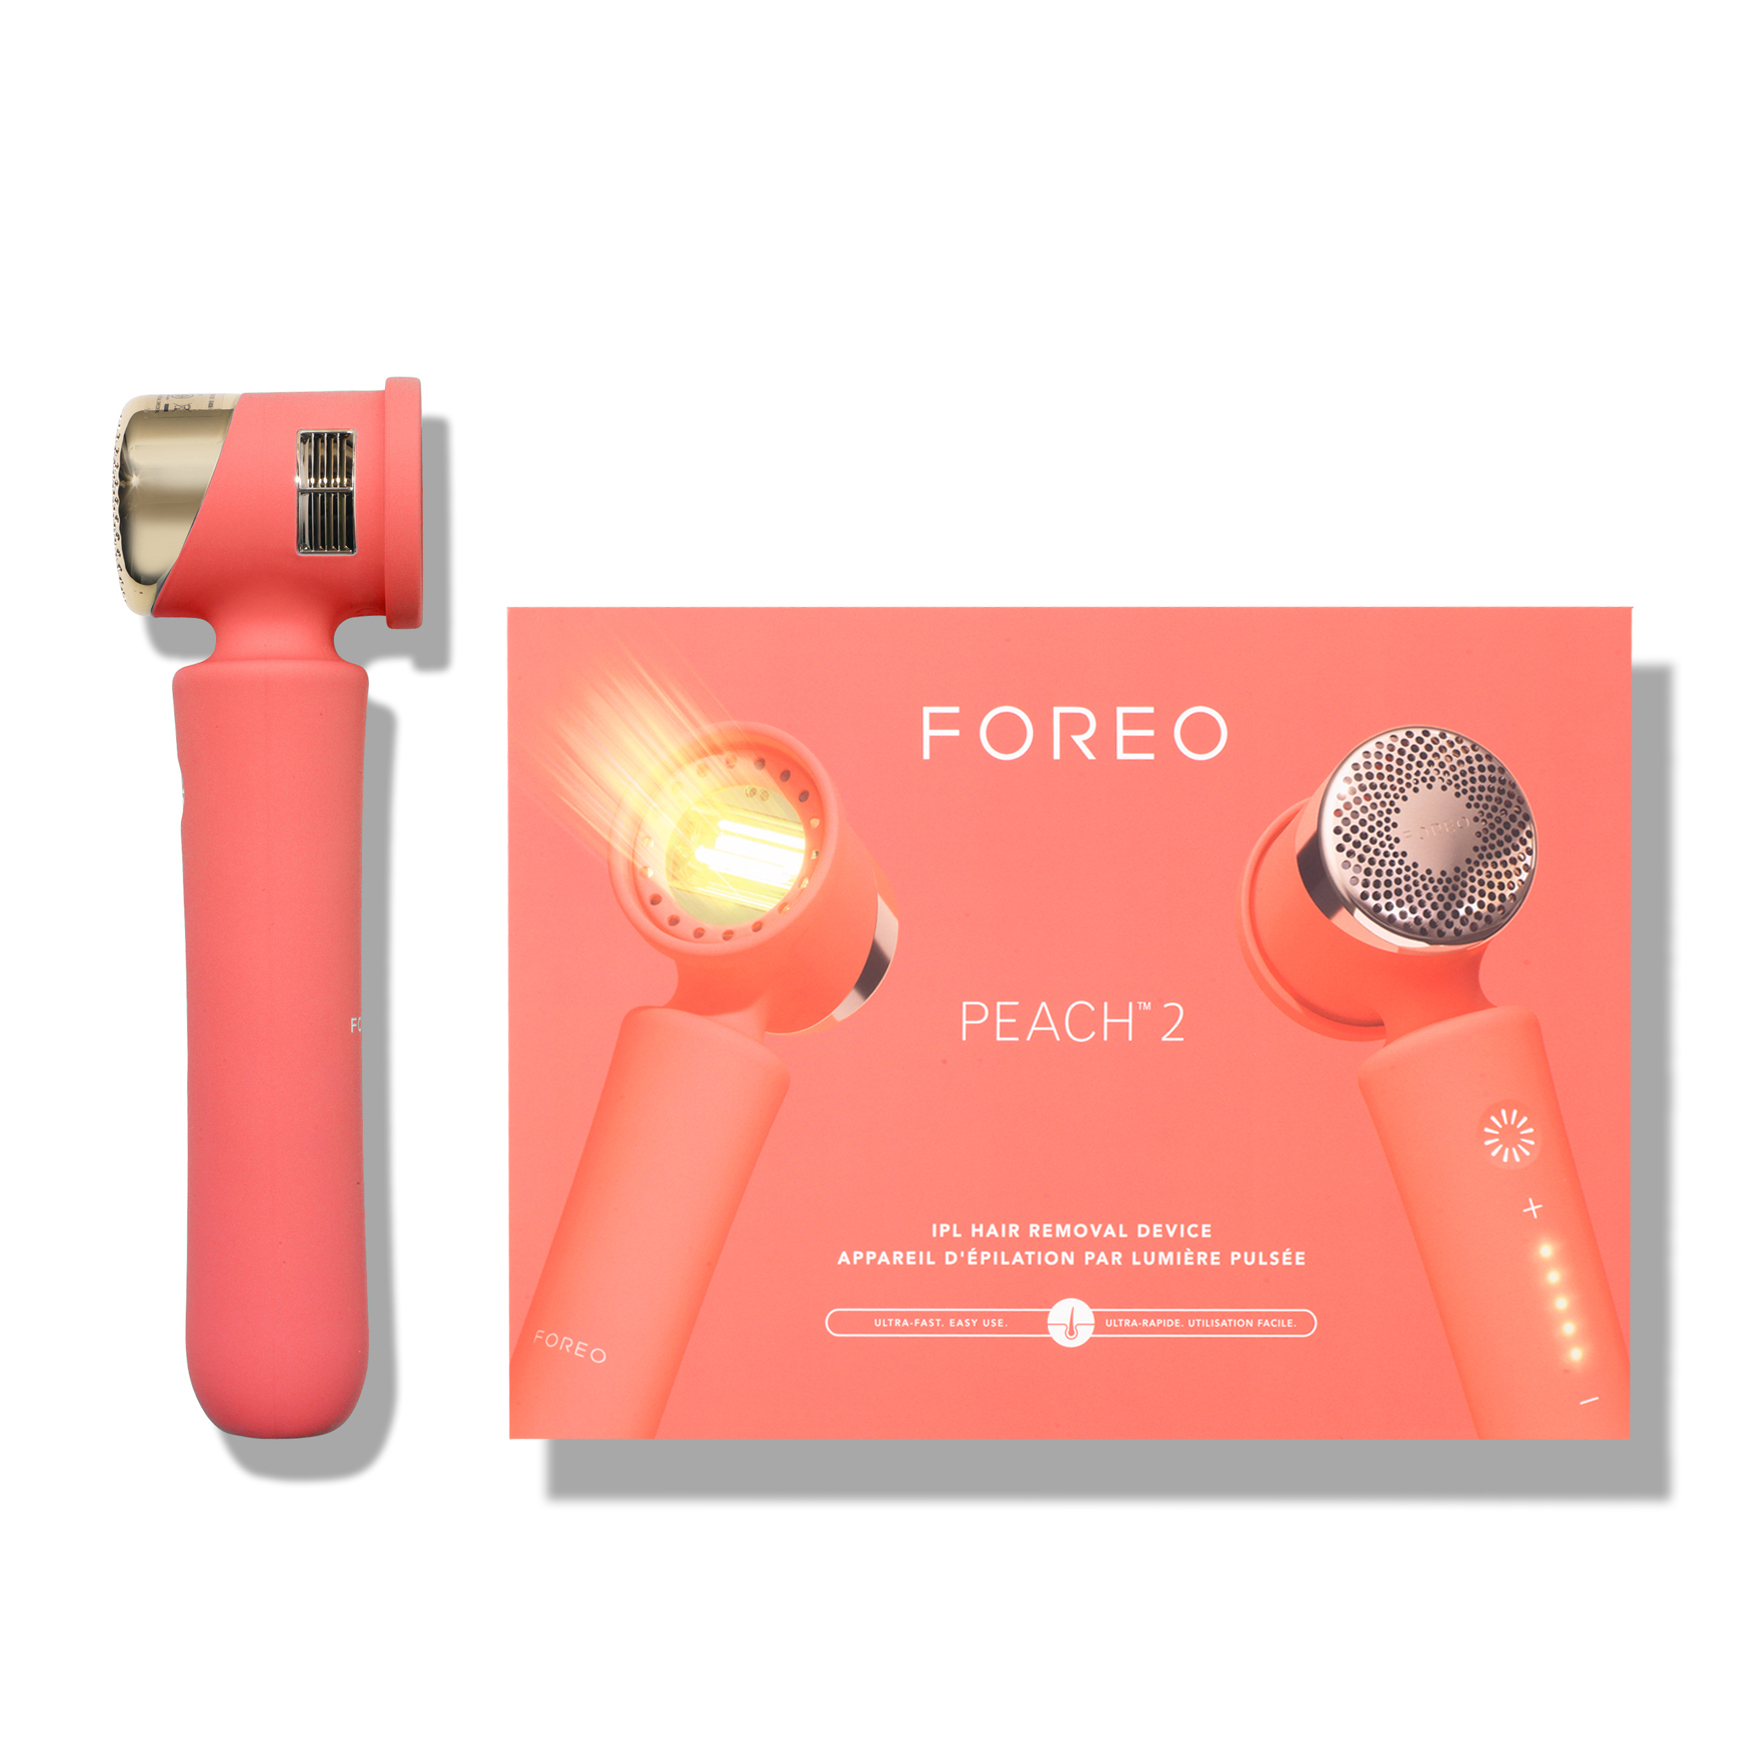 Foreo Peach 2 IPL Hair Removal Device | Space NK